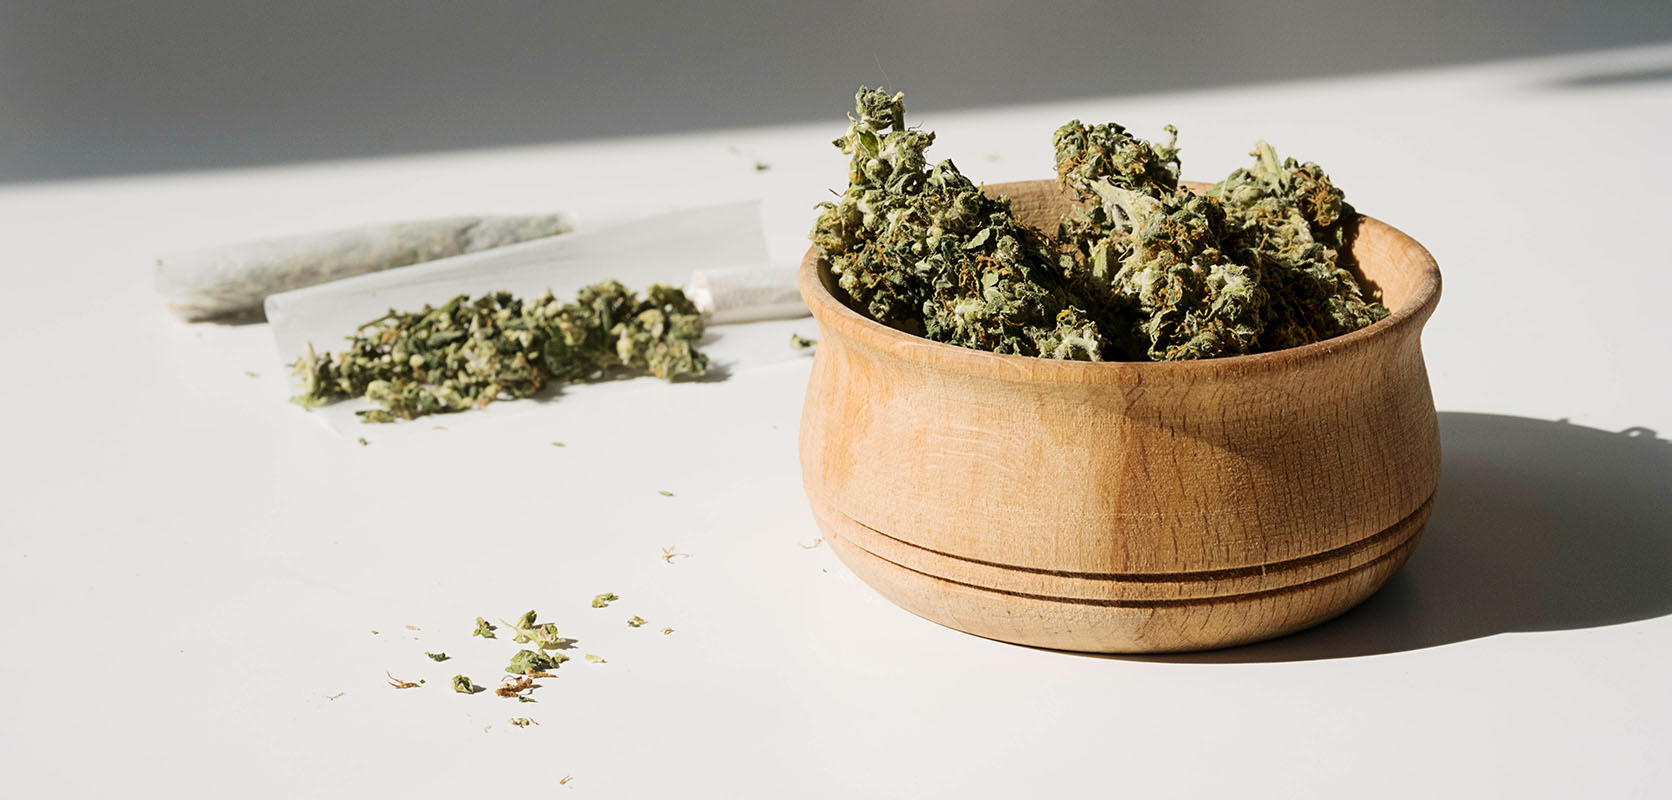 image of weed in a grinder that was bought online in canada. buy weed online and order weed from west coast cannabis online dispensary.